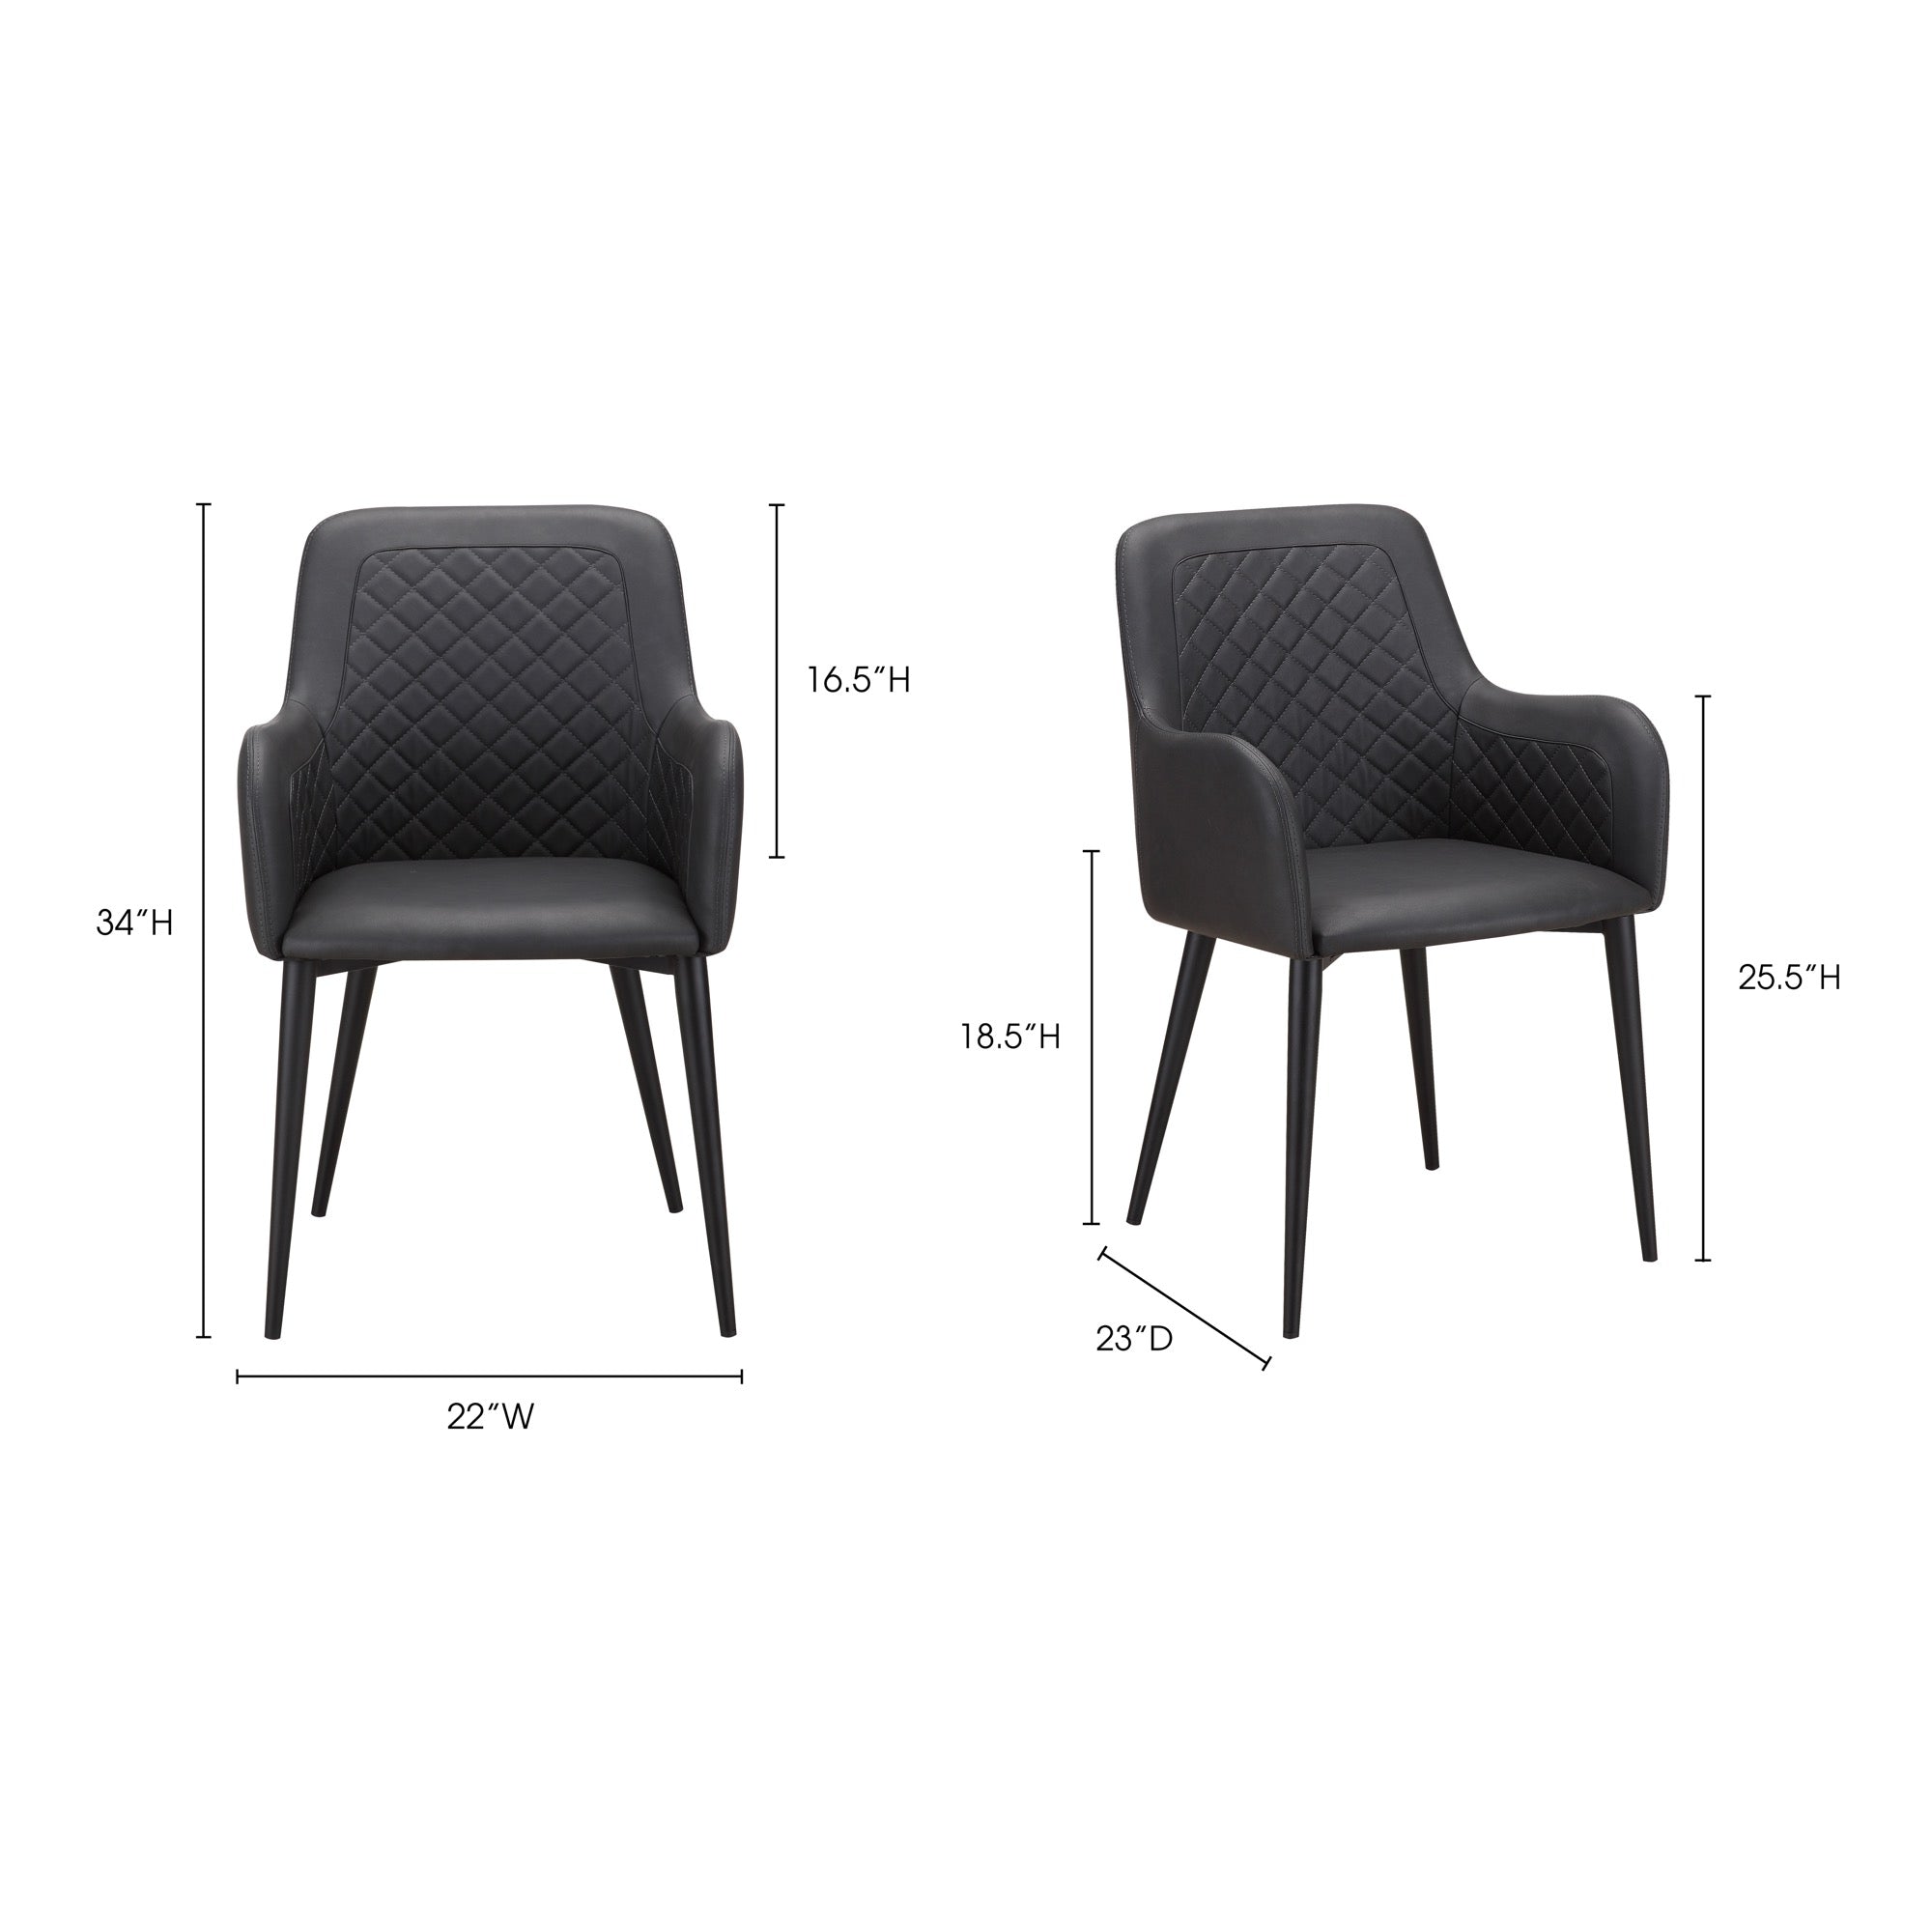 Cantata Dining Chair Mayon Black Vegan Leather - Set Of Two